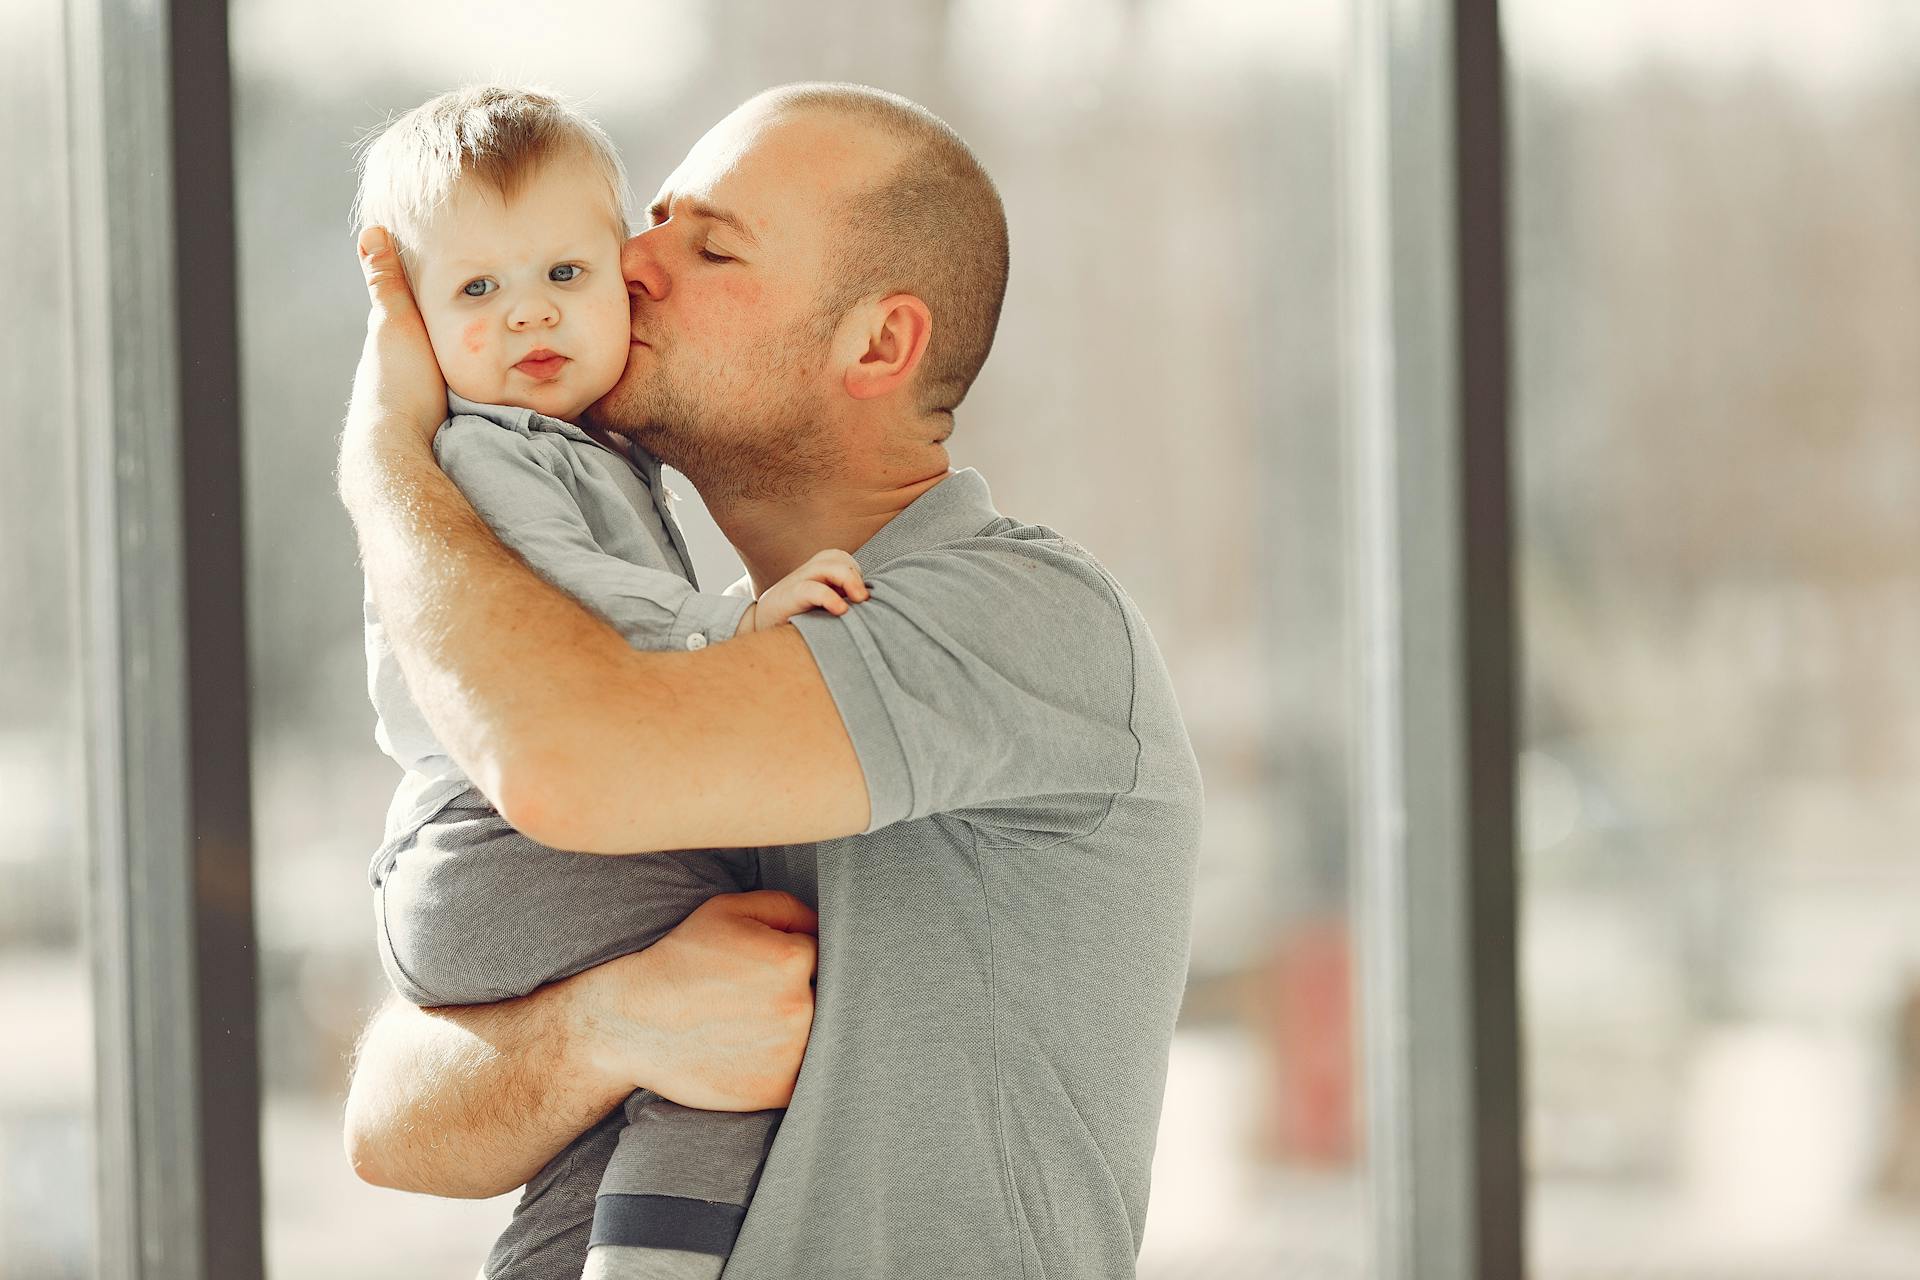 A father kissing his baby | Source: Pexels